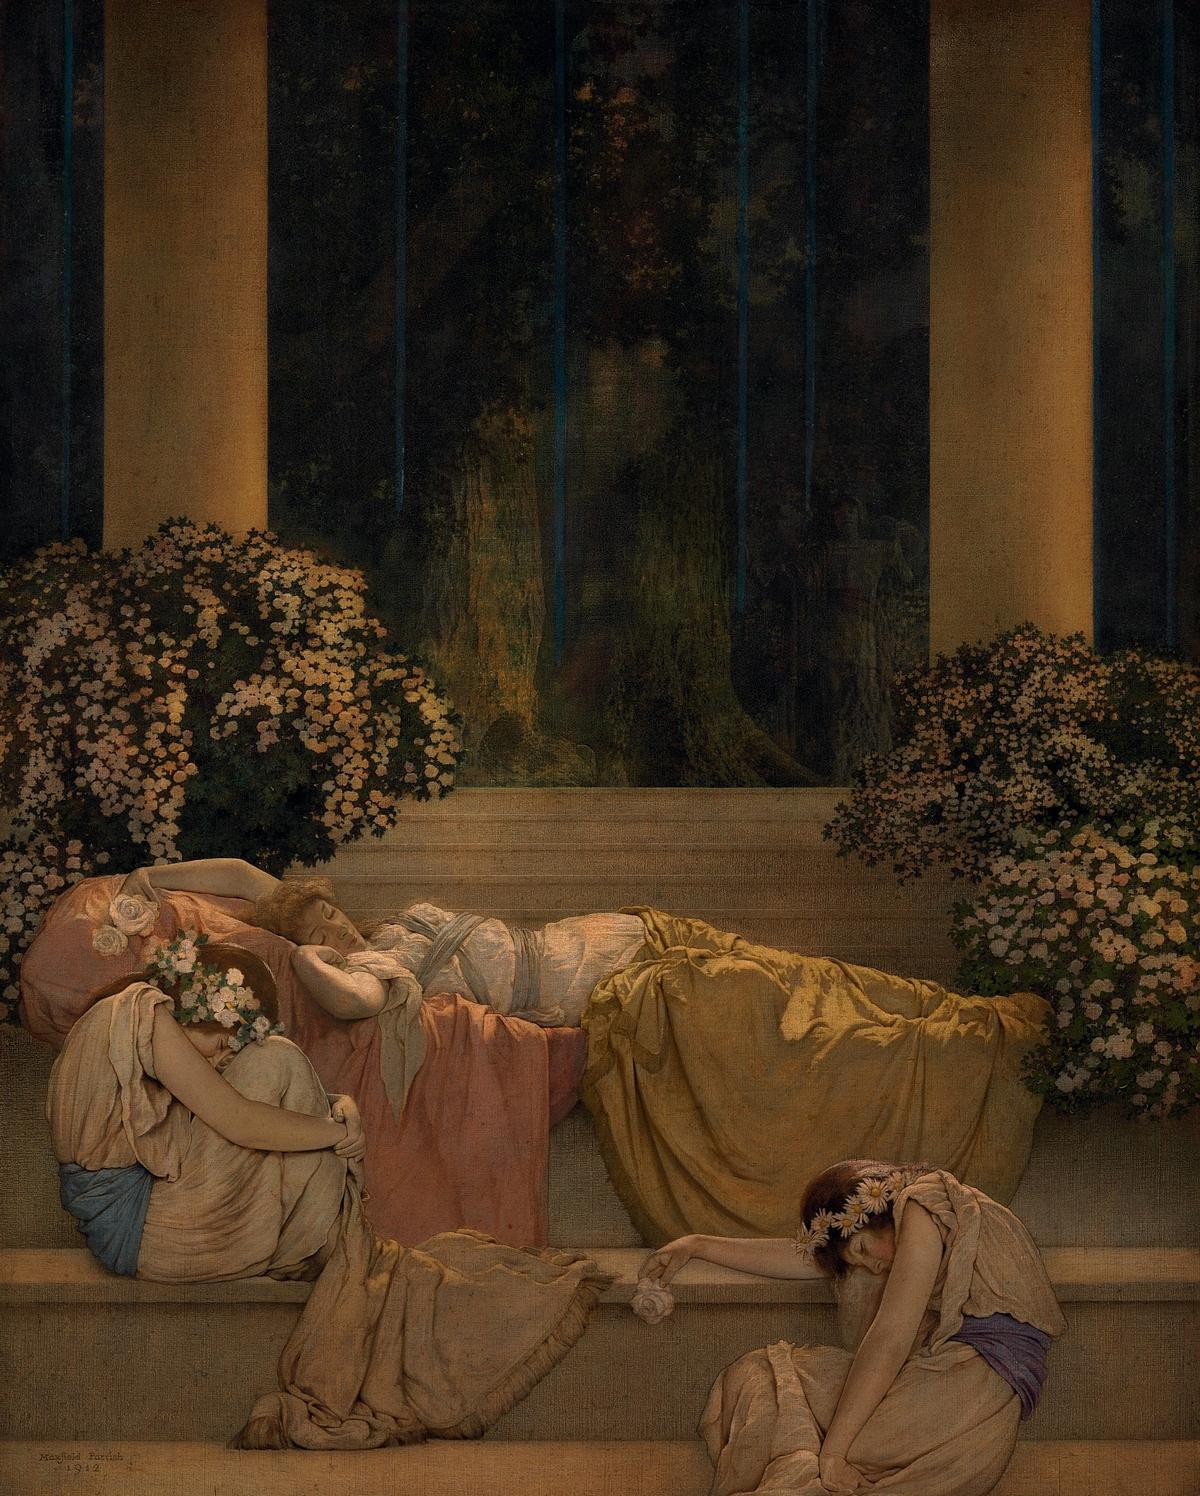 "Sleeping Beauty in the Wood," 1912, by Maxfield Parrish. Oil on canvas mounted on panel; 30 inches by 24 inches. (Public Domain)